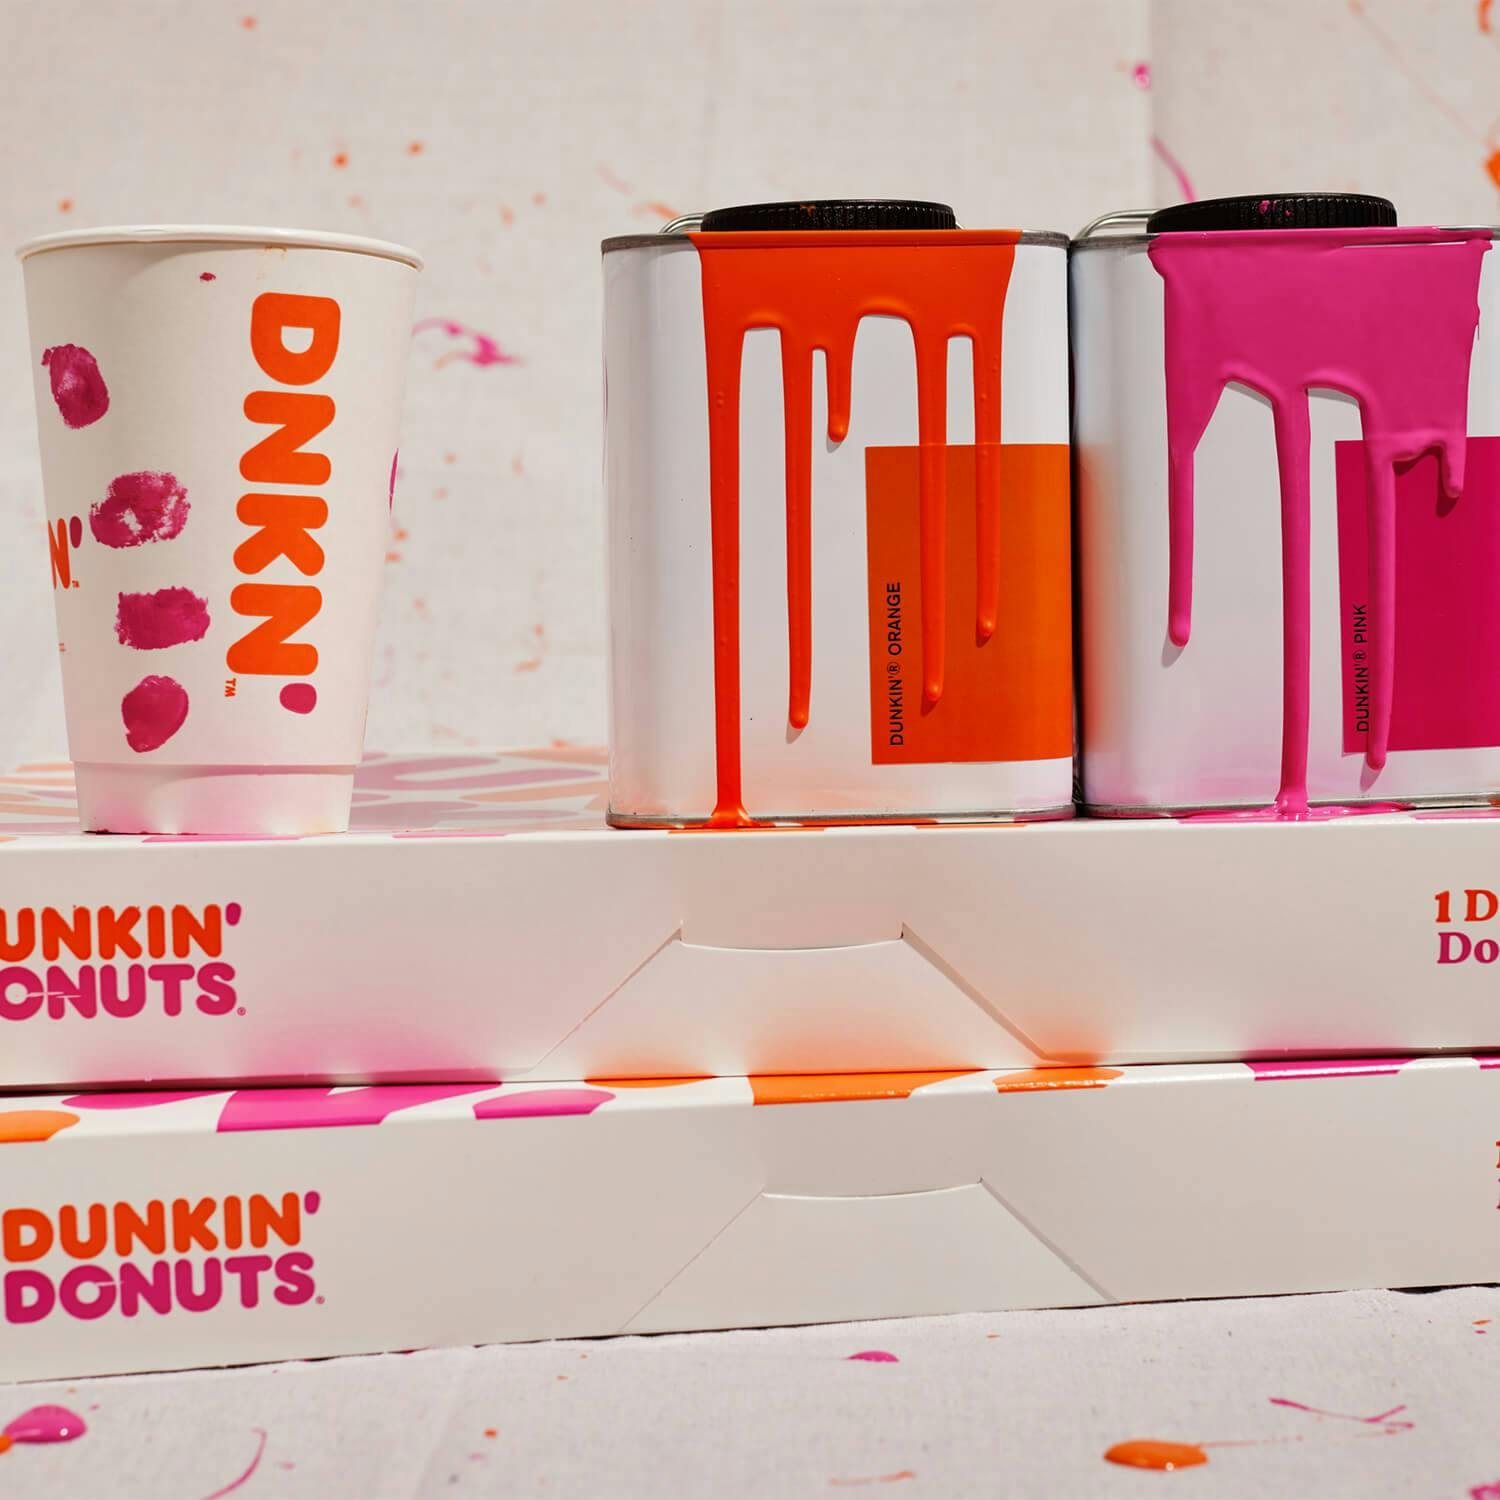 Dunkin'® Orange and Dunkin'® Pink paint cans next to a coffee cup on top of boxes of donuts